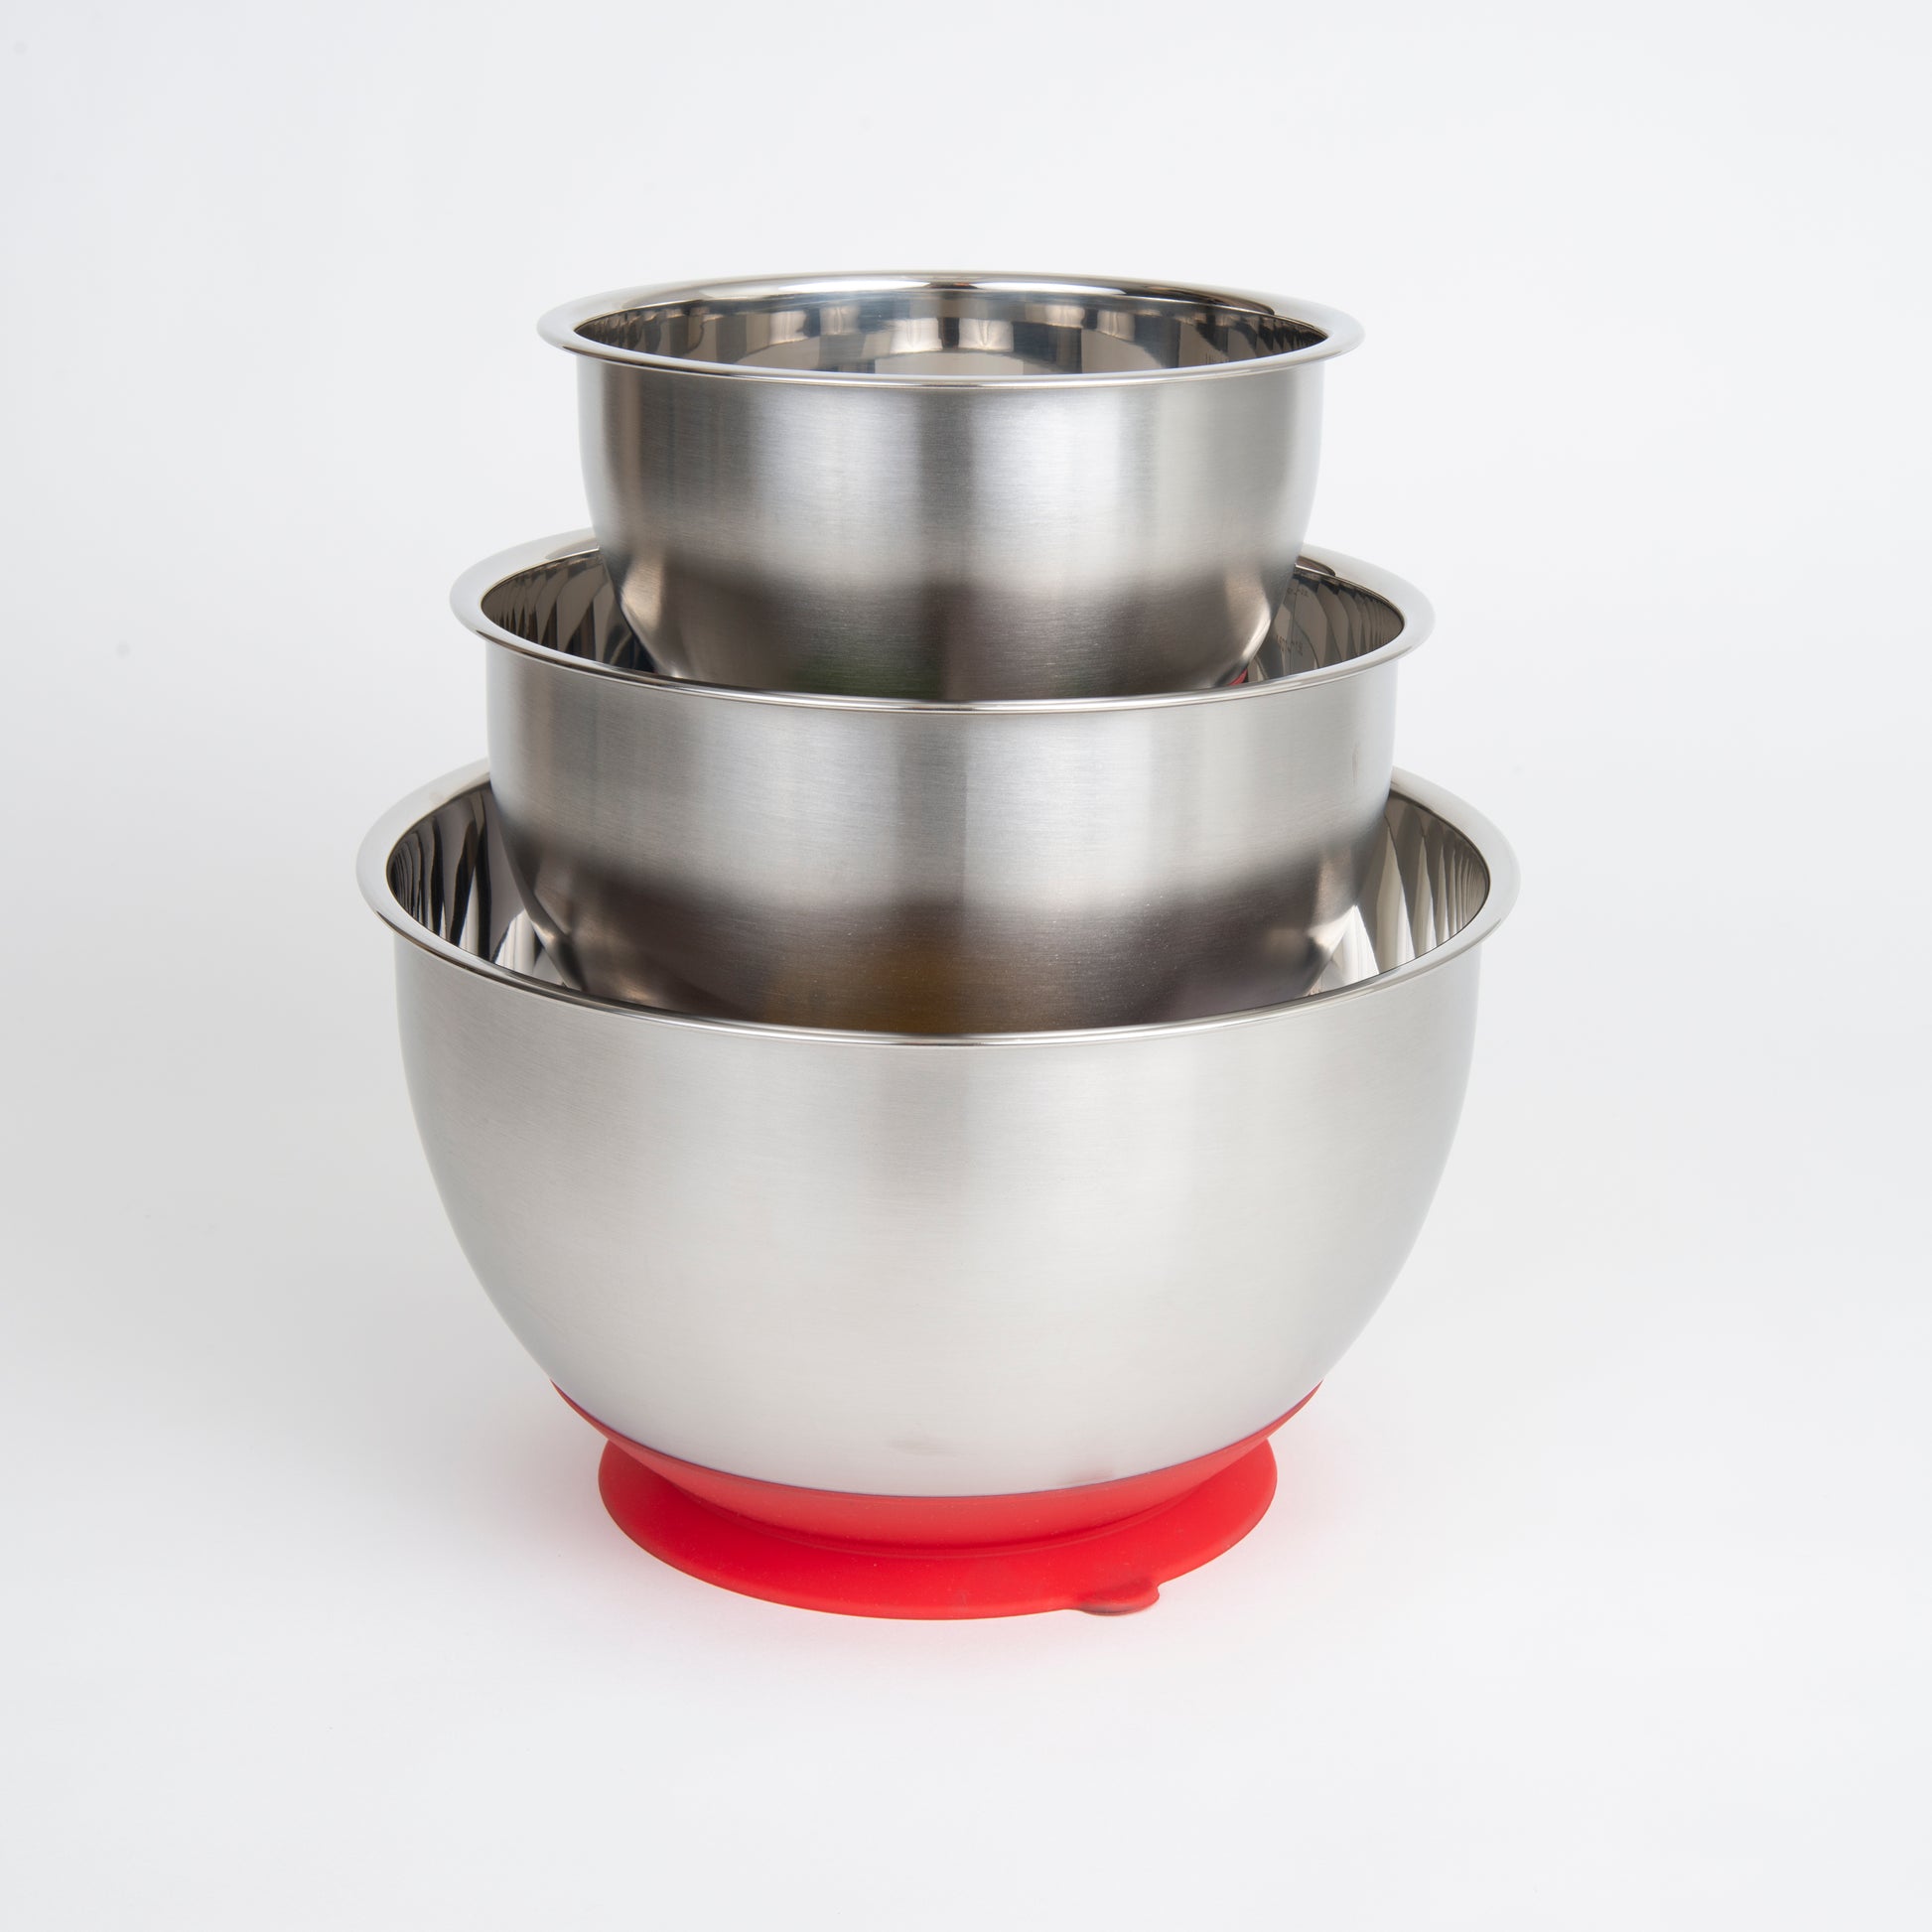 Choice Stainless Steel Standard Mixing Bowl Set with Silicone Bottom - 9/Set